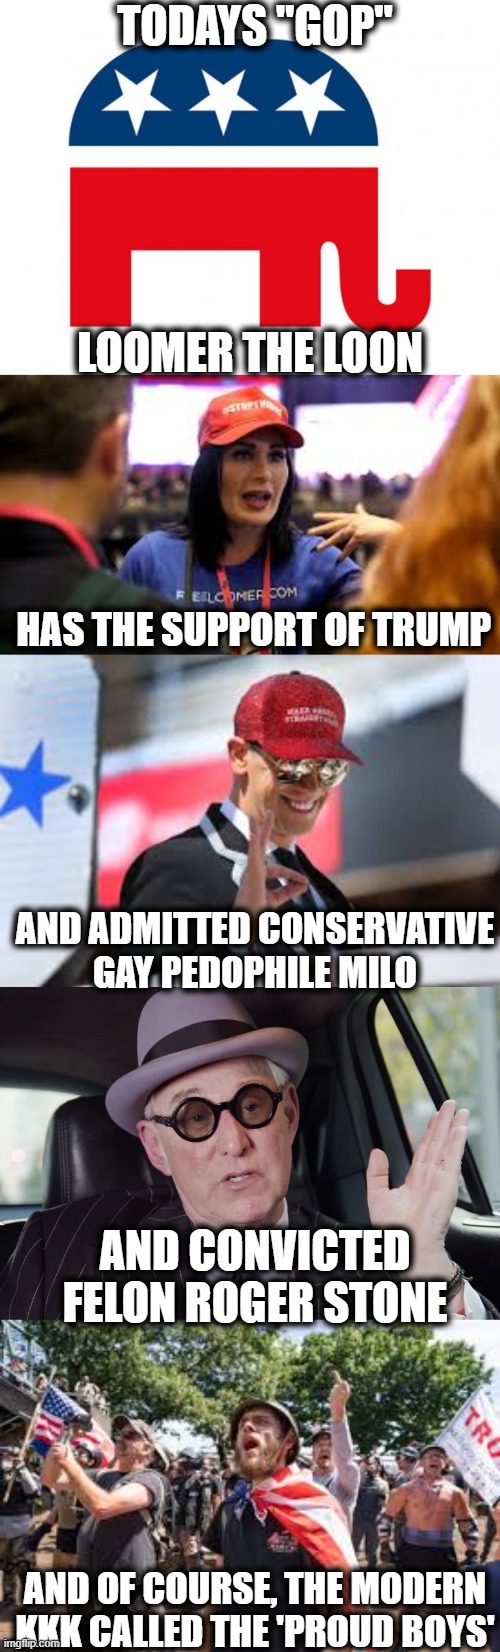 So many former decent republicans, rolling in their graves. | TODAYS "GOP"; LOOMER THE LOON; HAS THE SUPPORT OF TRUMP; AND ADMITTED CONSERVATIVE GAY PEDOPHILE MILO; AND CONVICTED FELON ROGER STONE; AND OF COURSE, THE MODERN KKK CALLED THE 'PROUD BOYS' | image tagged in republican,memes,politics,maga,impeach trump,sad | made w/ Imgflip meme maker